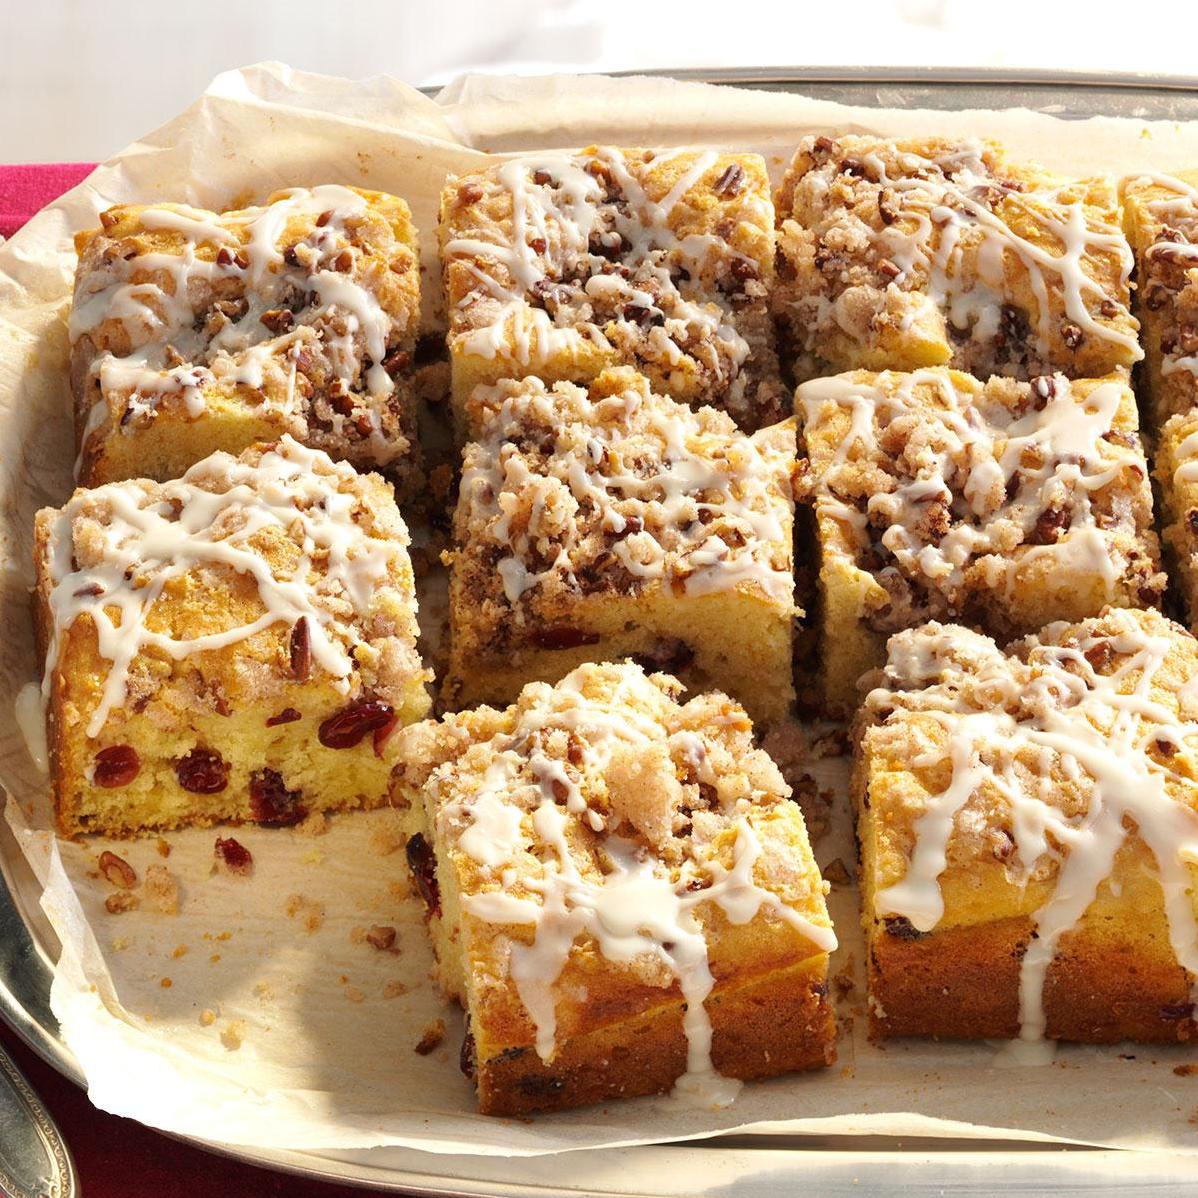  This coffee cake is the perfect holiday breakfast or dessert for coffee lovers.